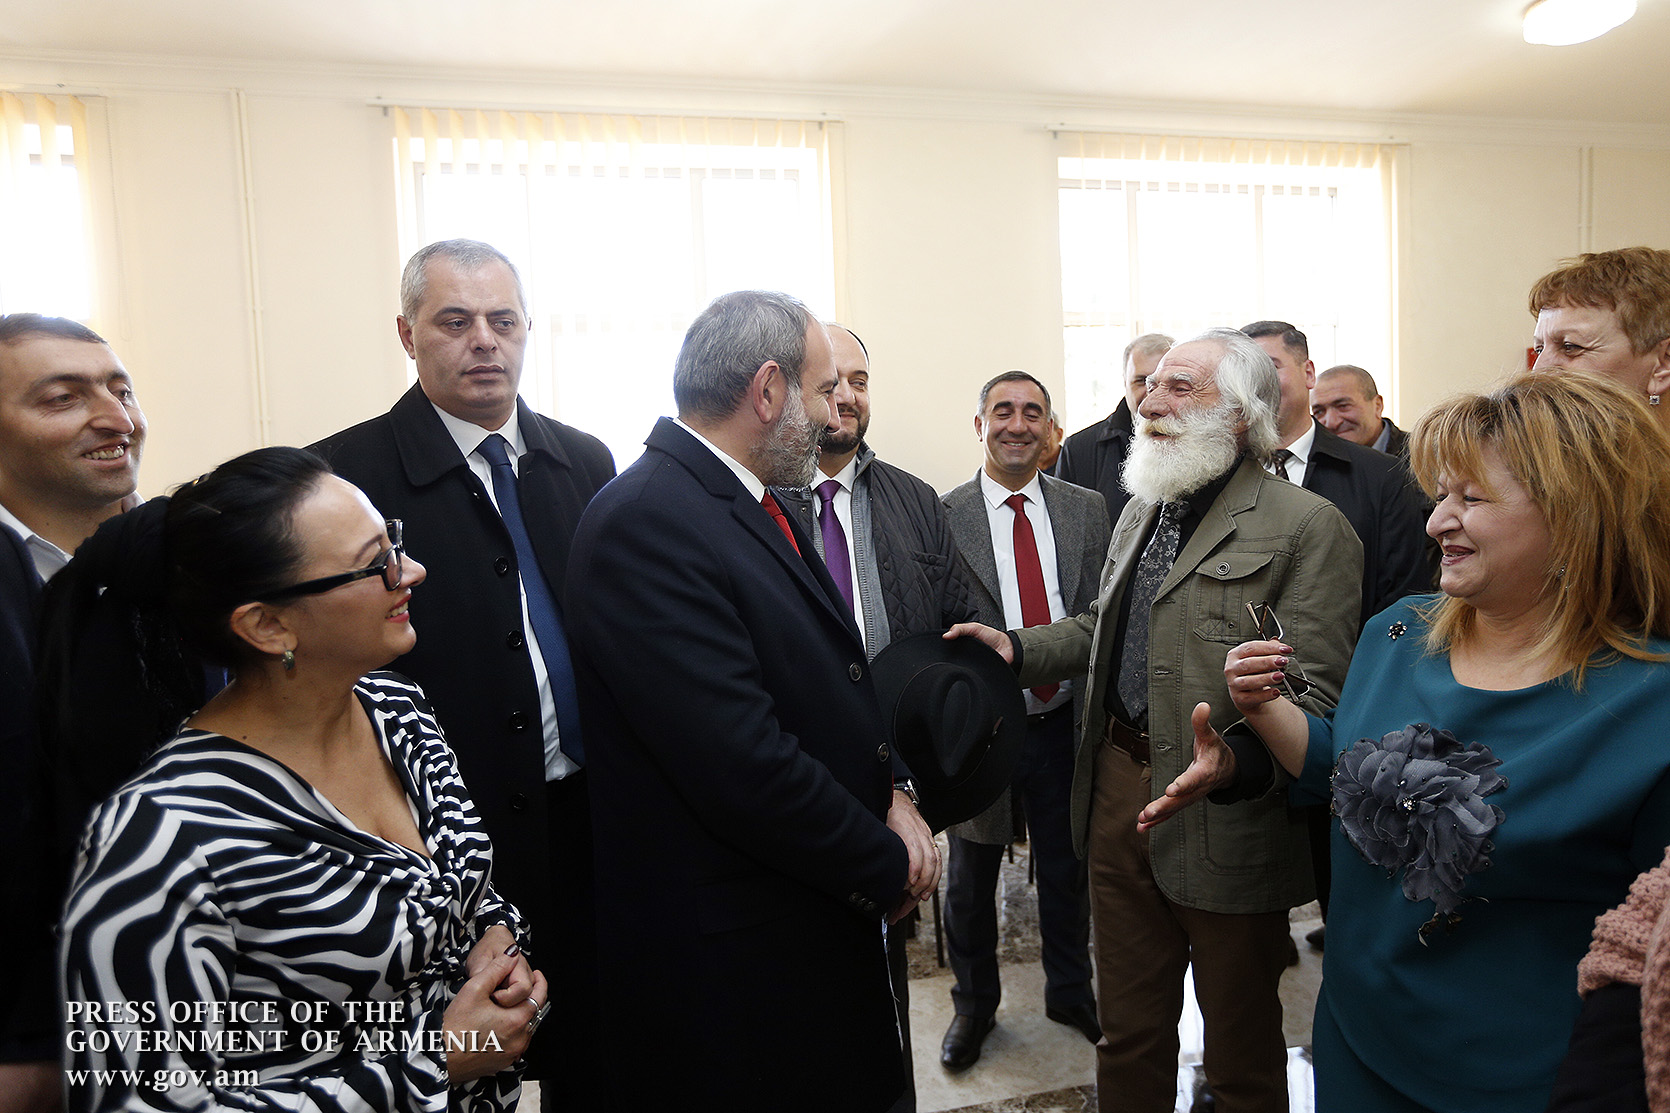 Nikol Pashinyan inspects school and stadium repairs in Martuni and Sevan; attends opening of Drama Theater in Gavar